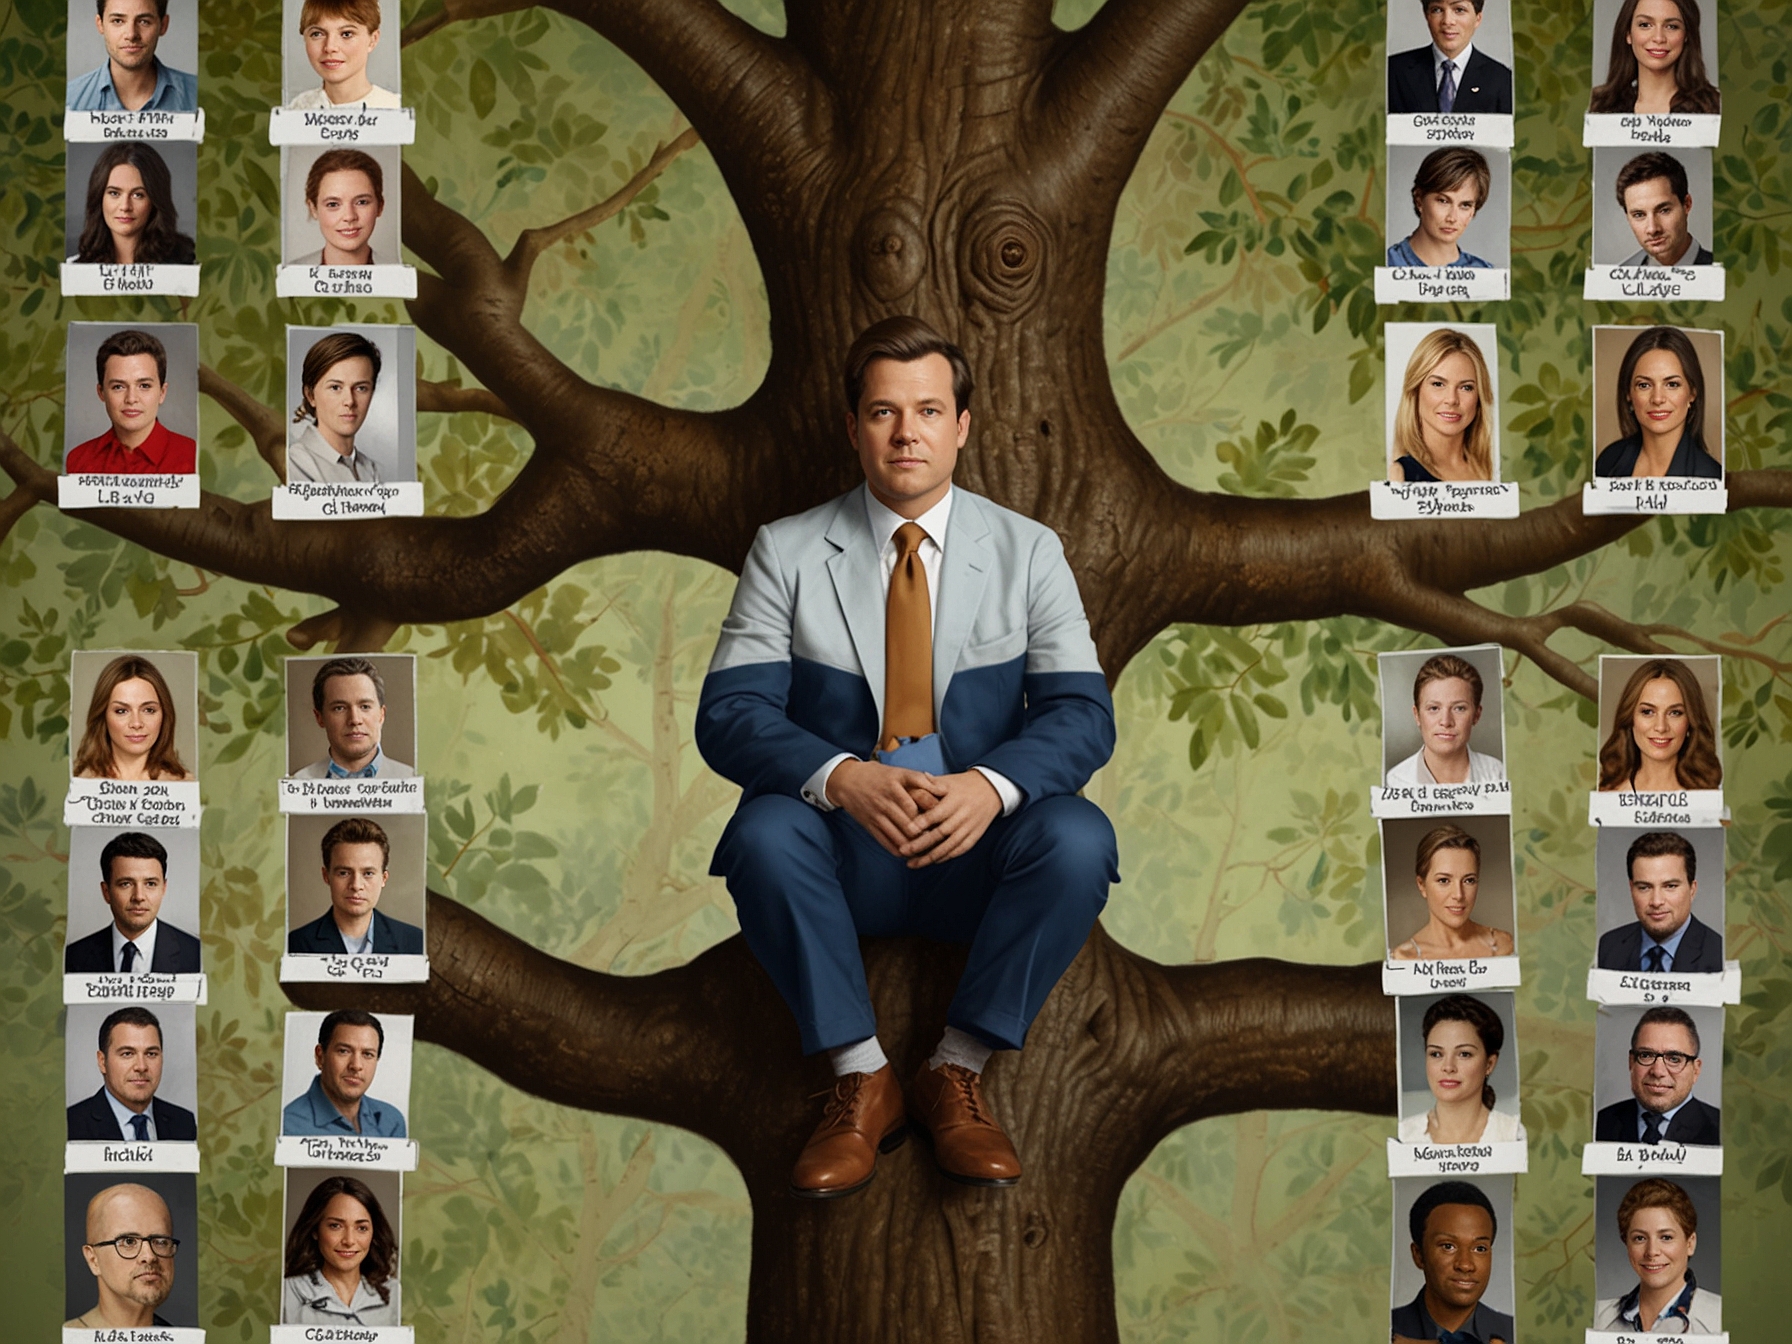 A visual representation of New York Magazine's 'nepo baby' cover story, showing famous 'nepo babies' in a family tree format to highlight Hollywood's nepotism issue.